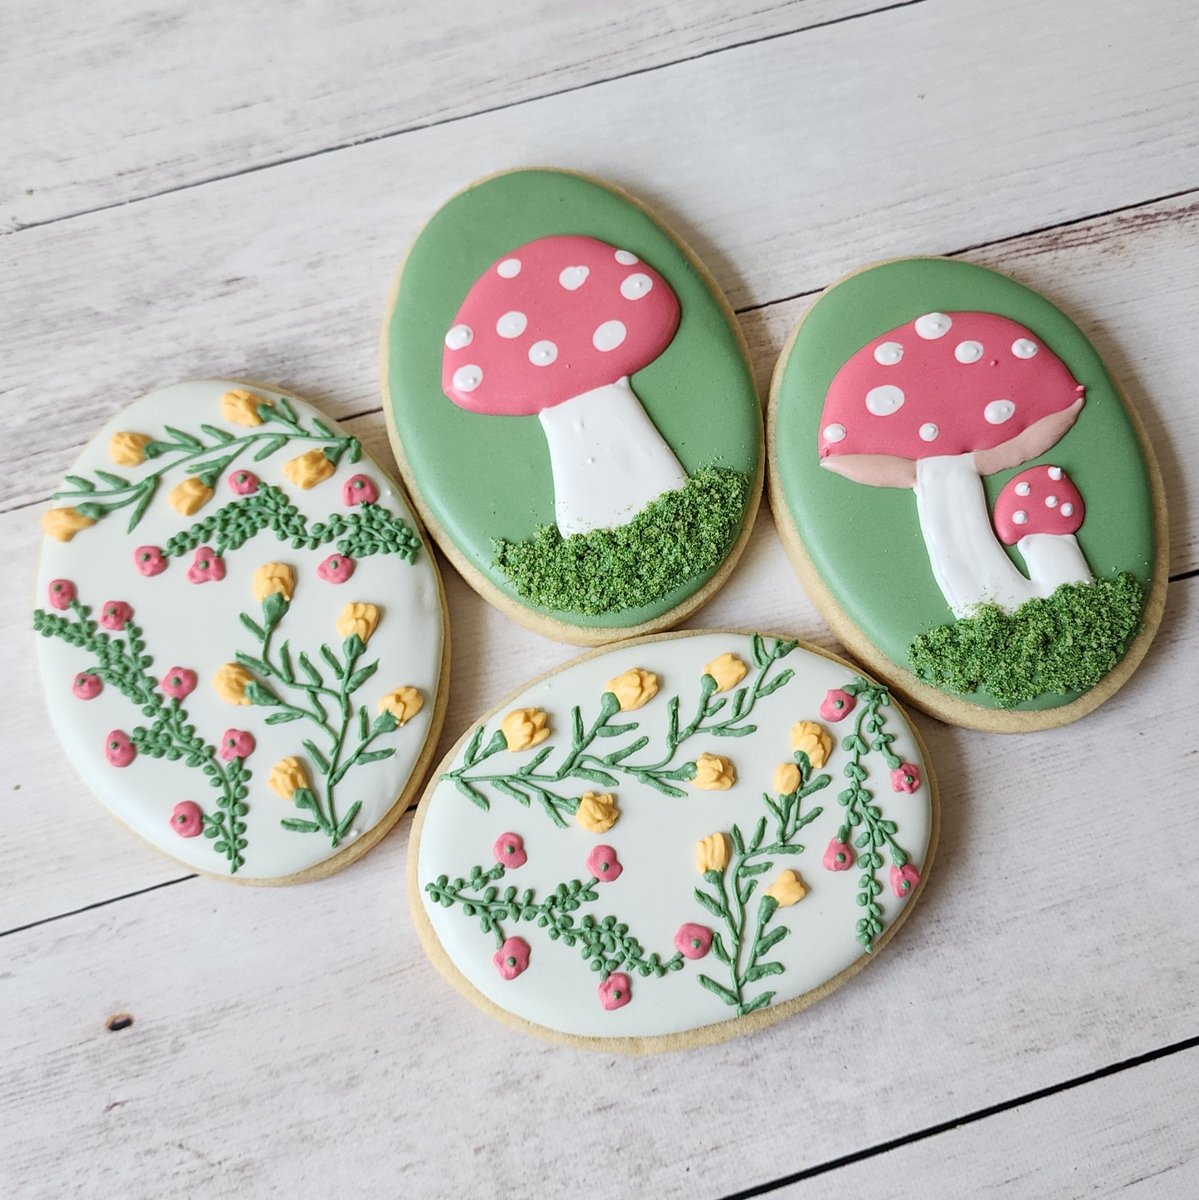 I love these little guys 🥰 #cookiedecorating #cottagecore